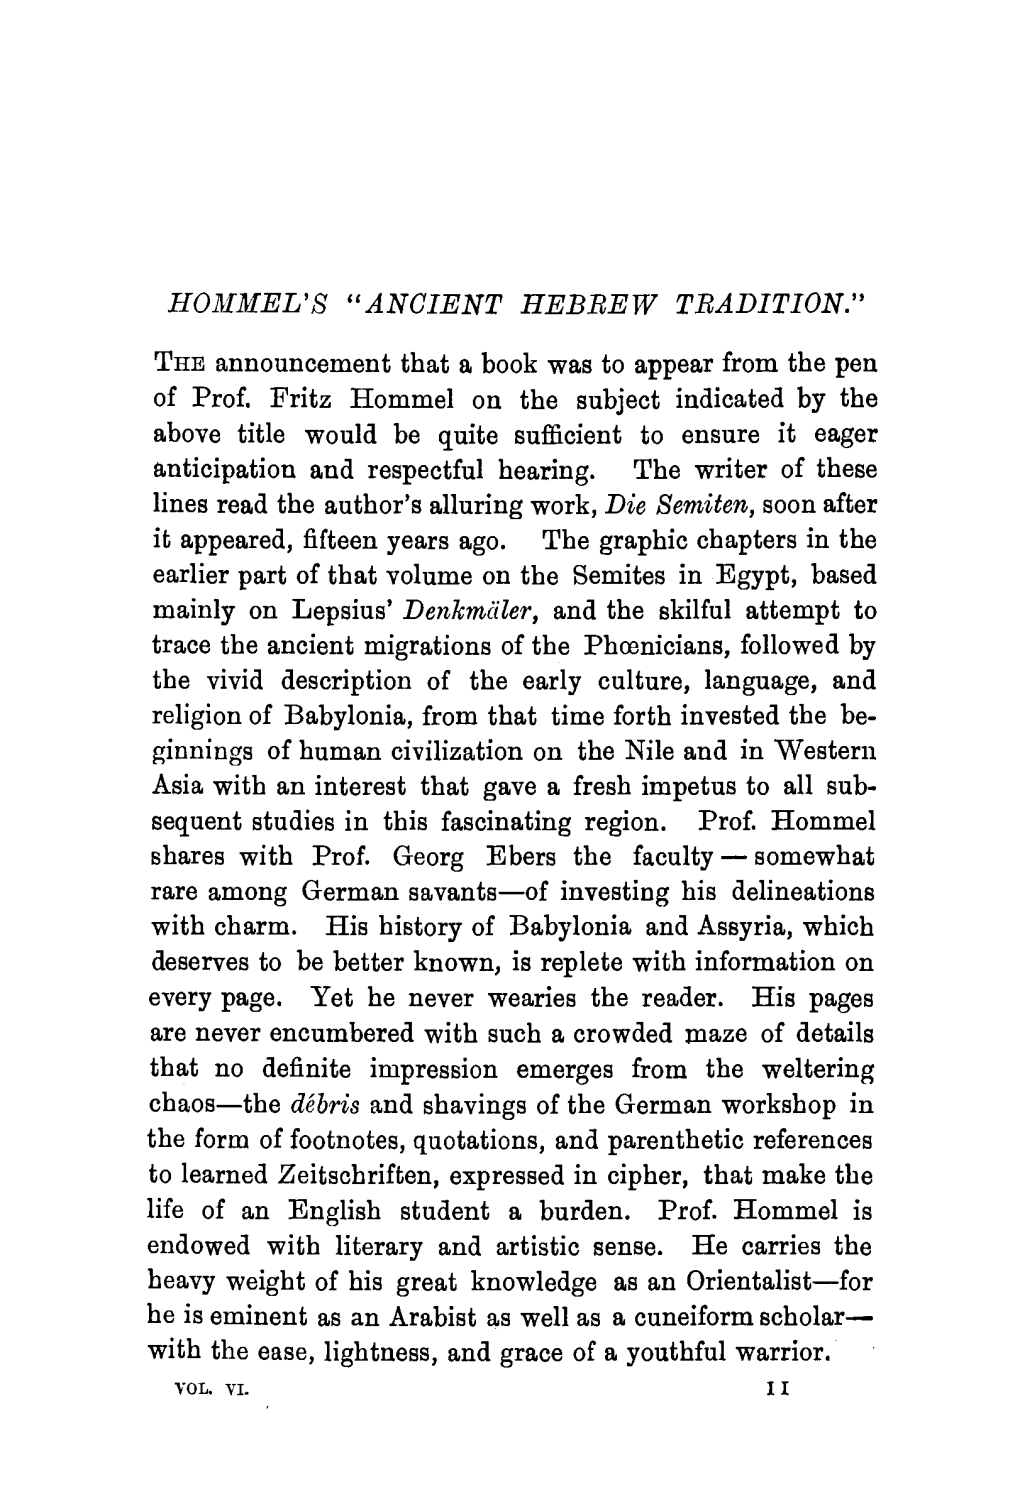 Hommel's "Ancient Hebrew Tradition."